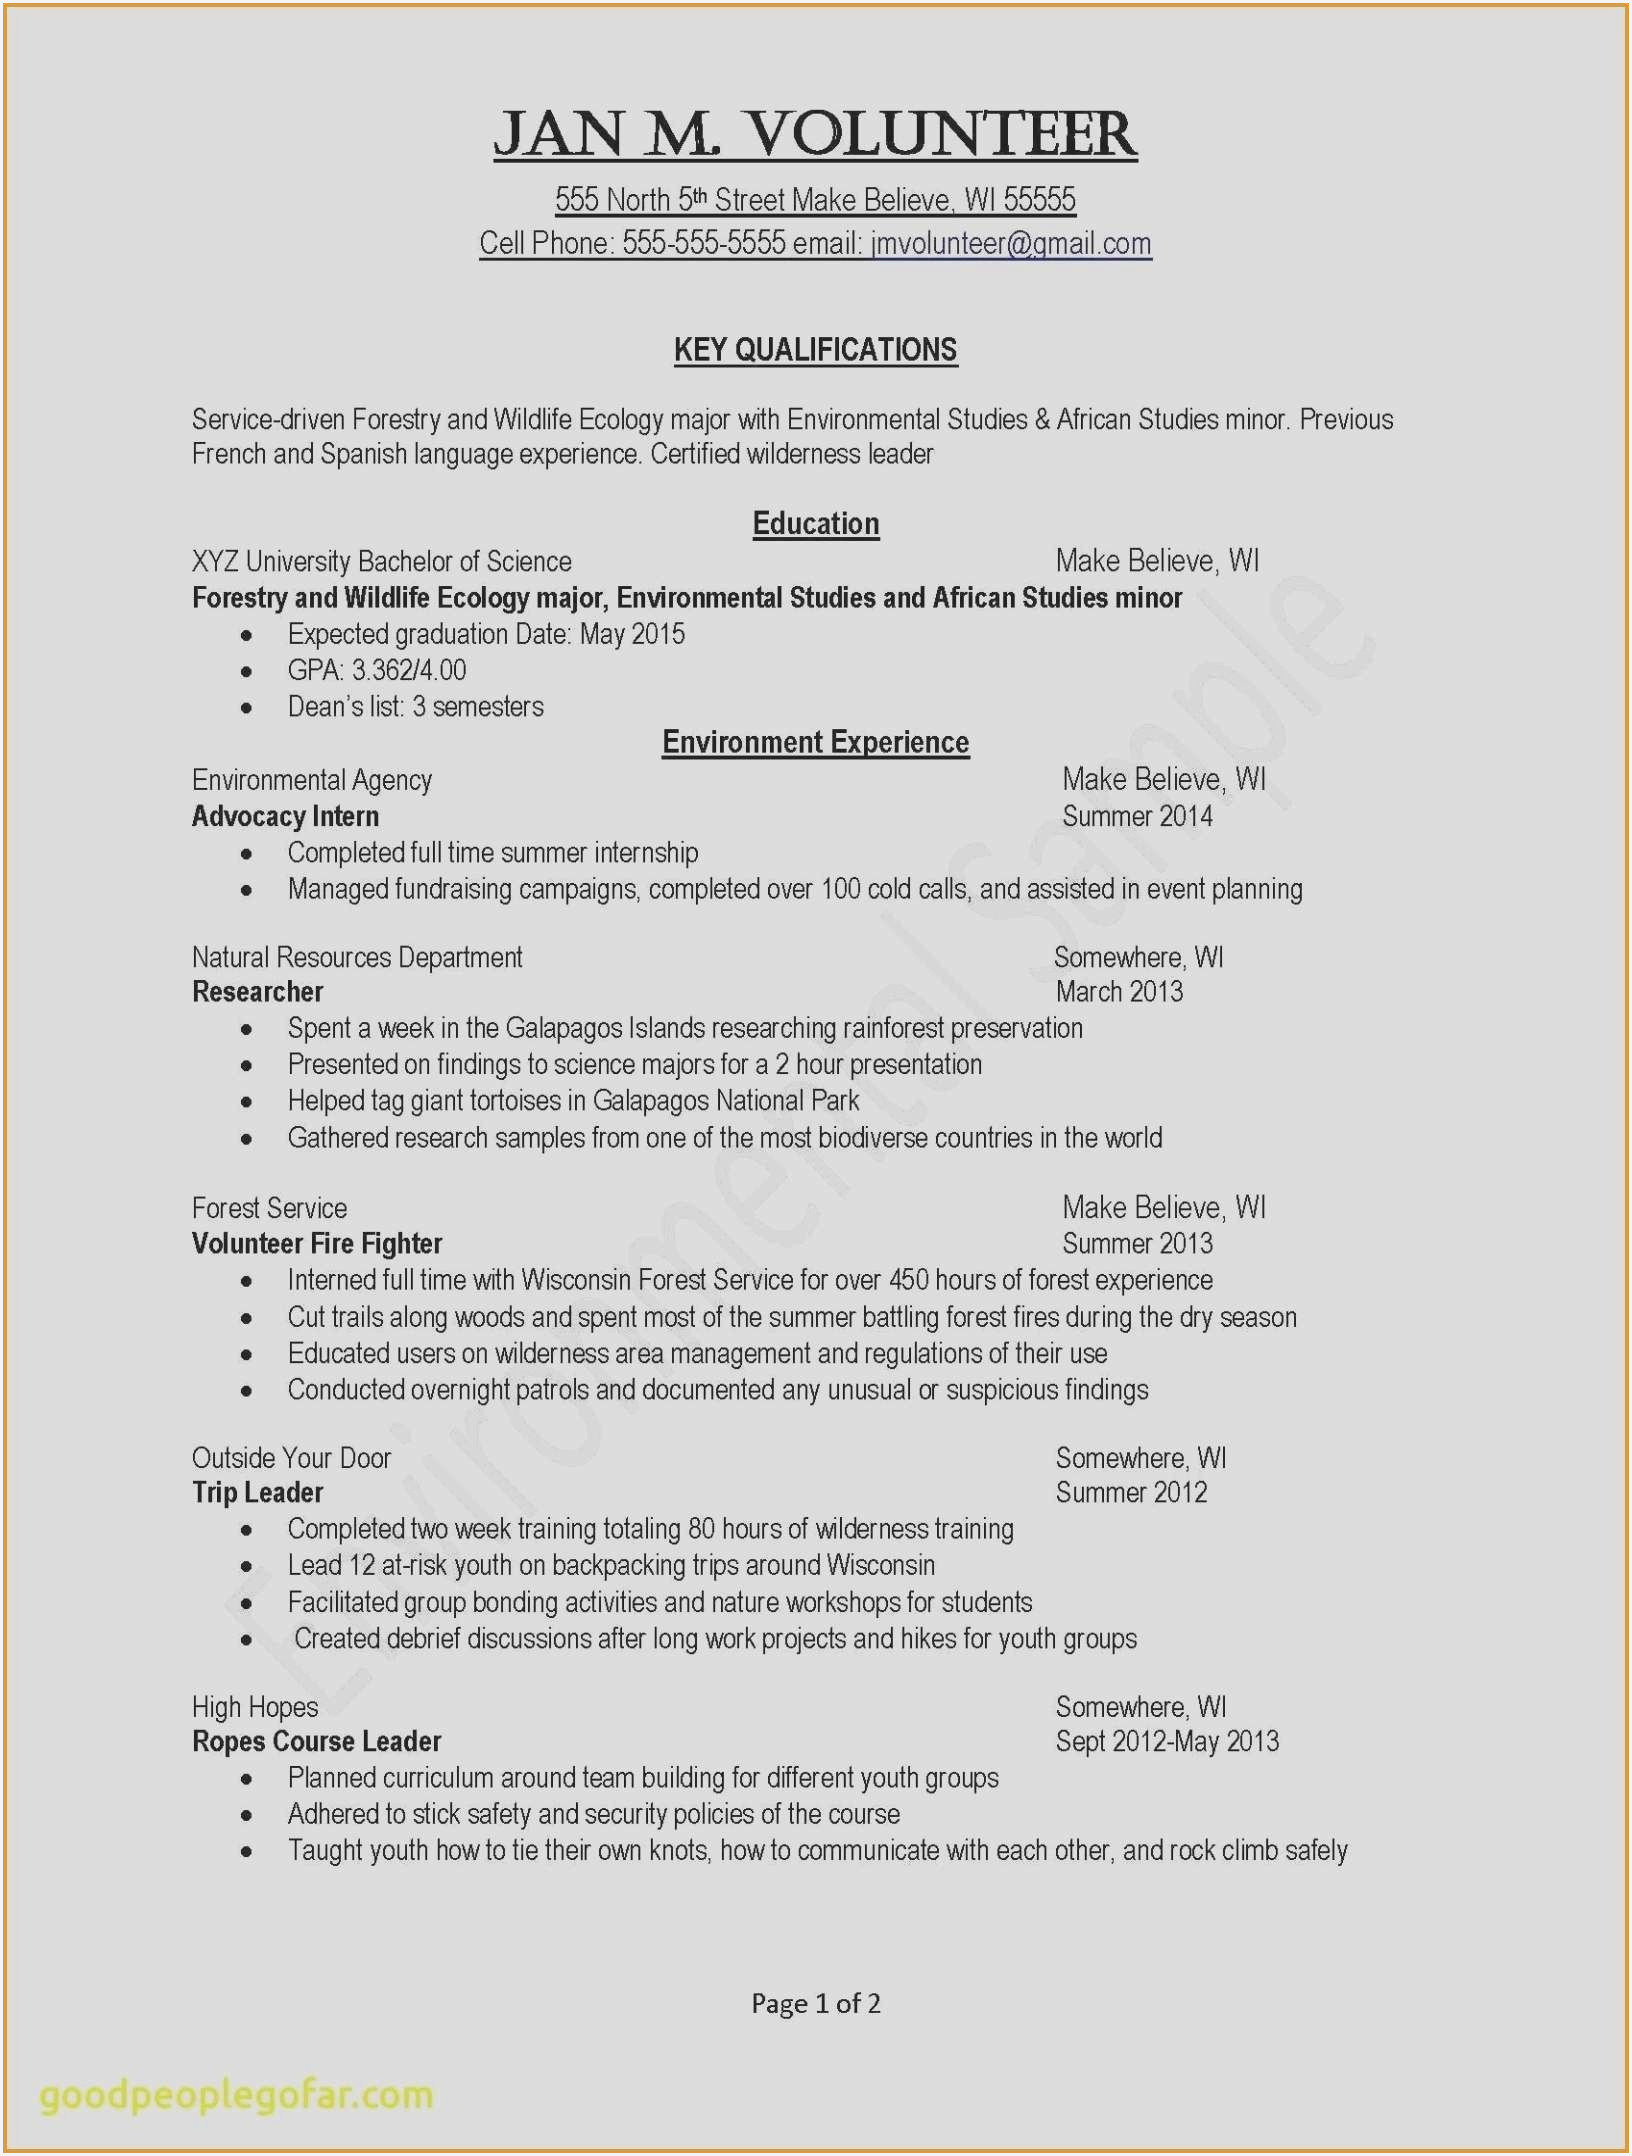 Sample Resume for Security Guard Philippines Sample Resume for Security Guard Philippines – Resume : Resume …